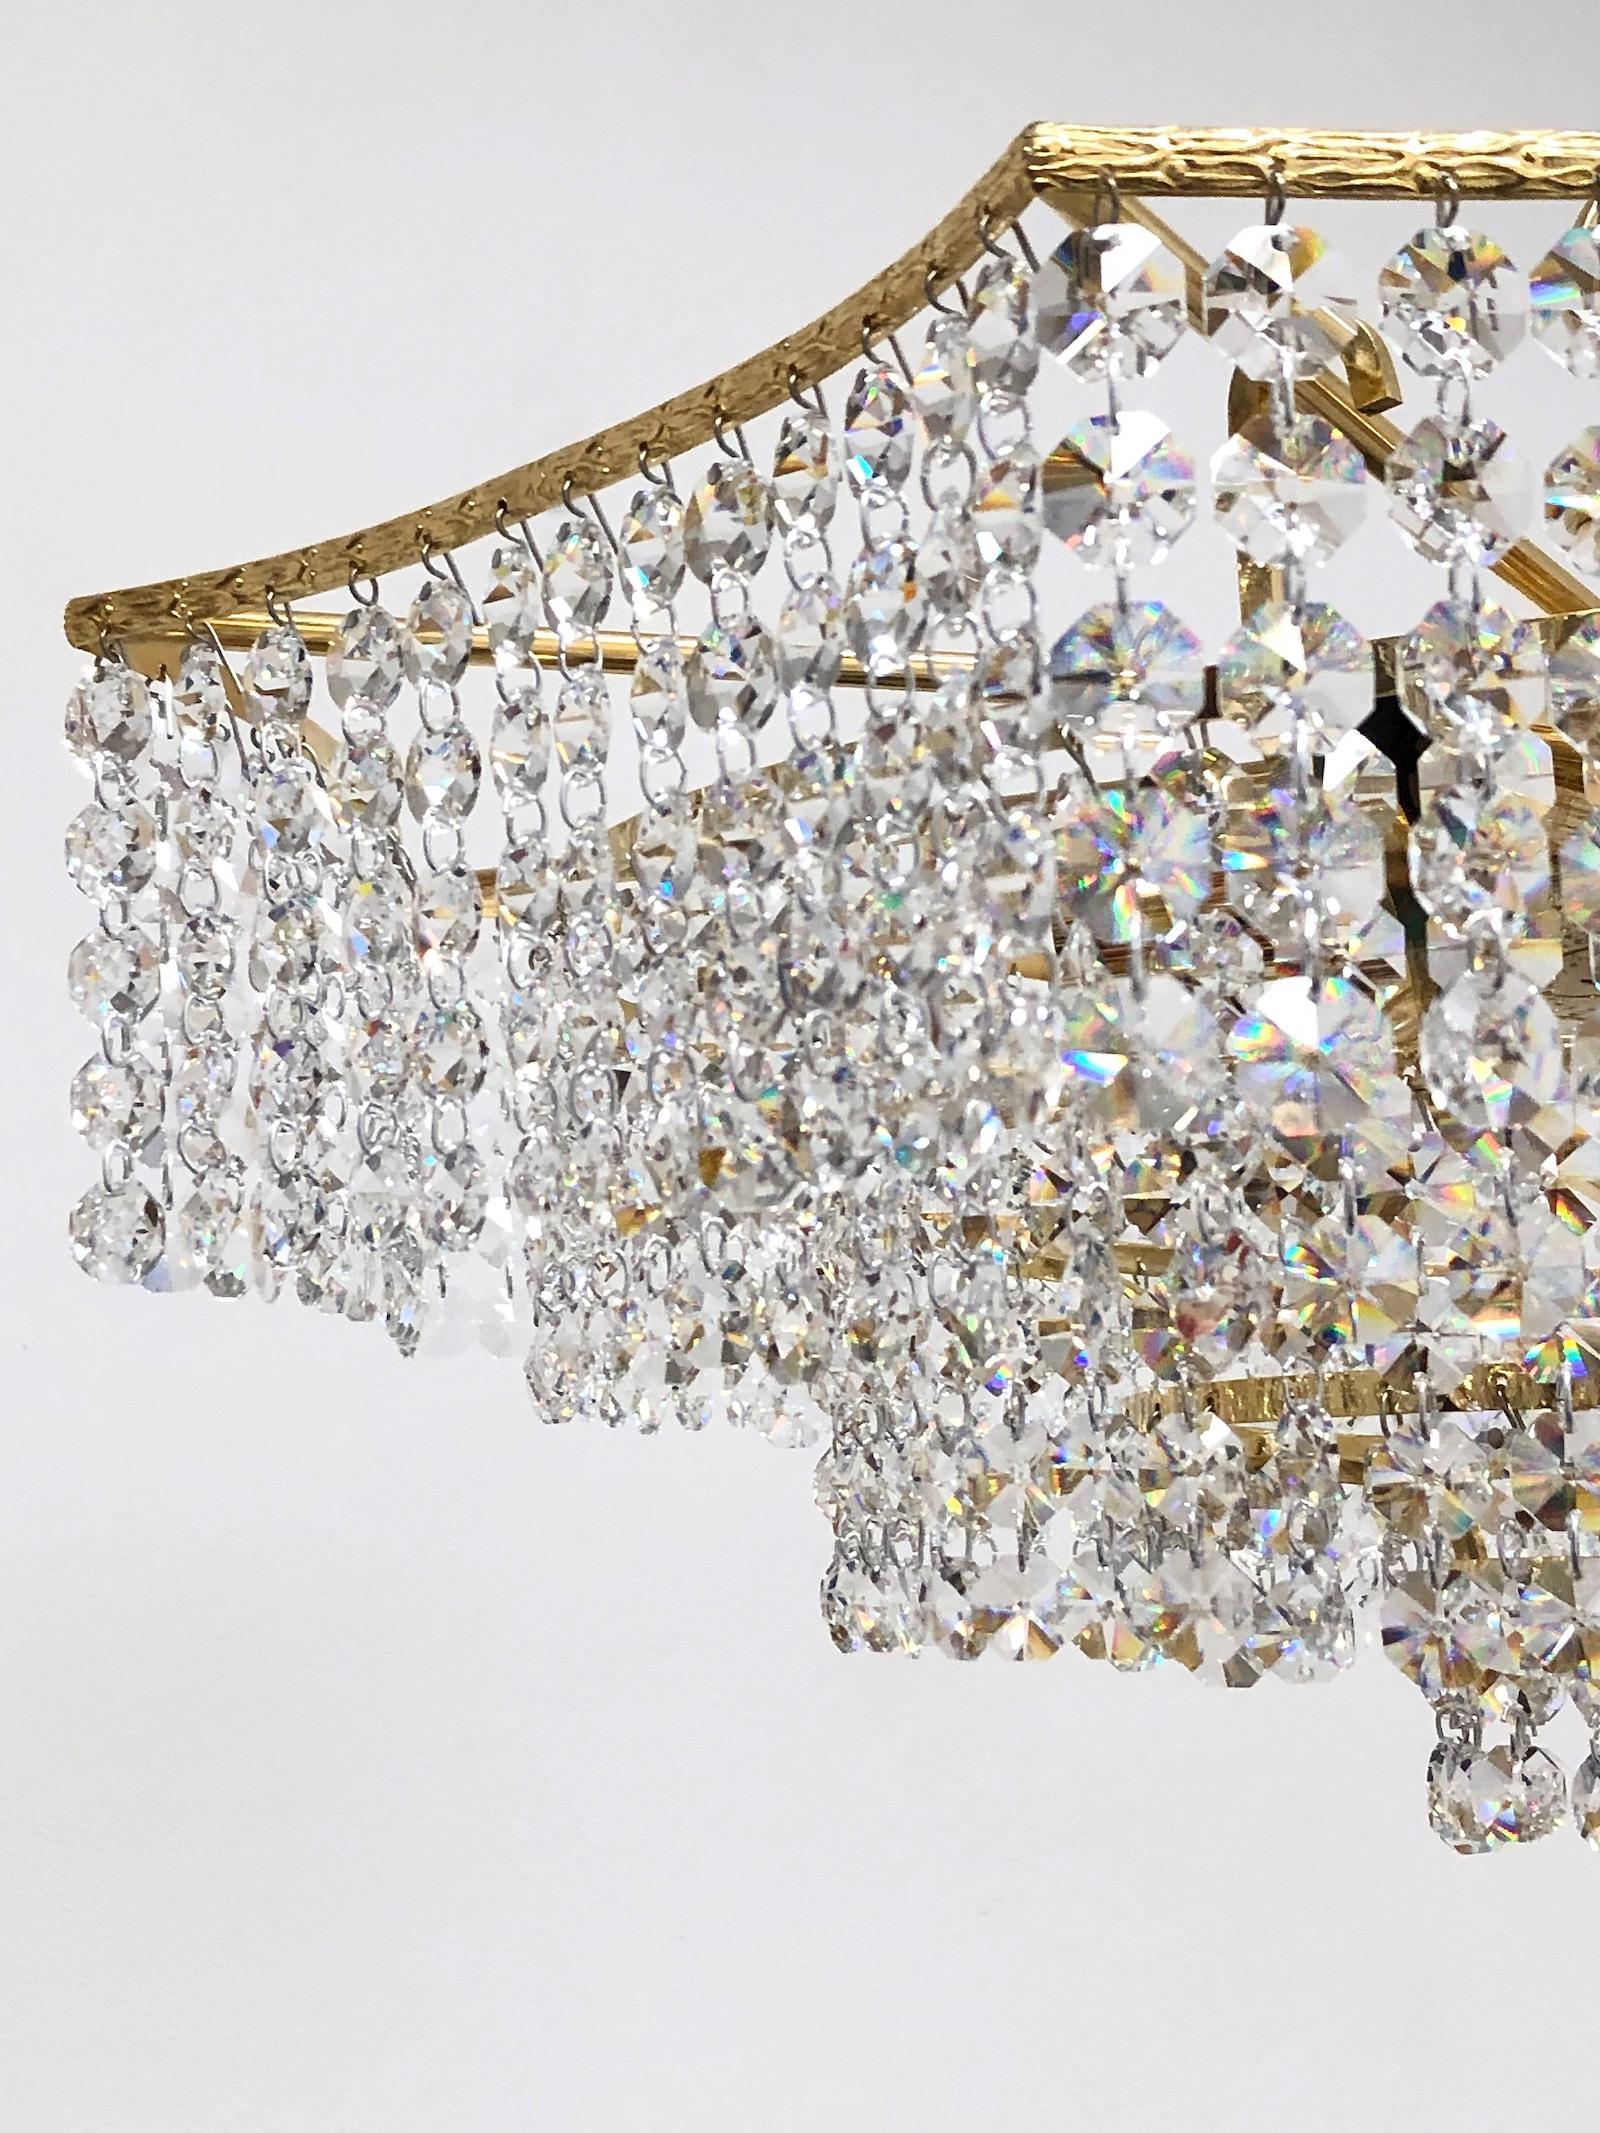 Brass and Crystal Glass Waterfall Chandelier, Richard Essig, Germany, 1960s For Sale 6